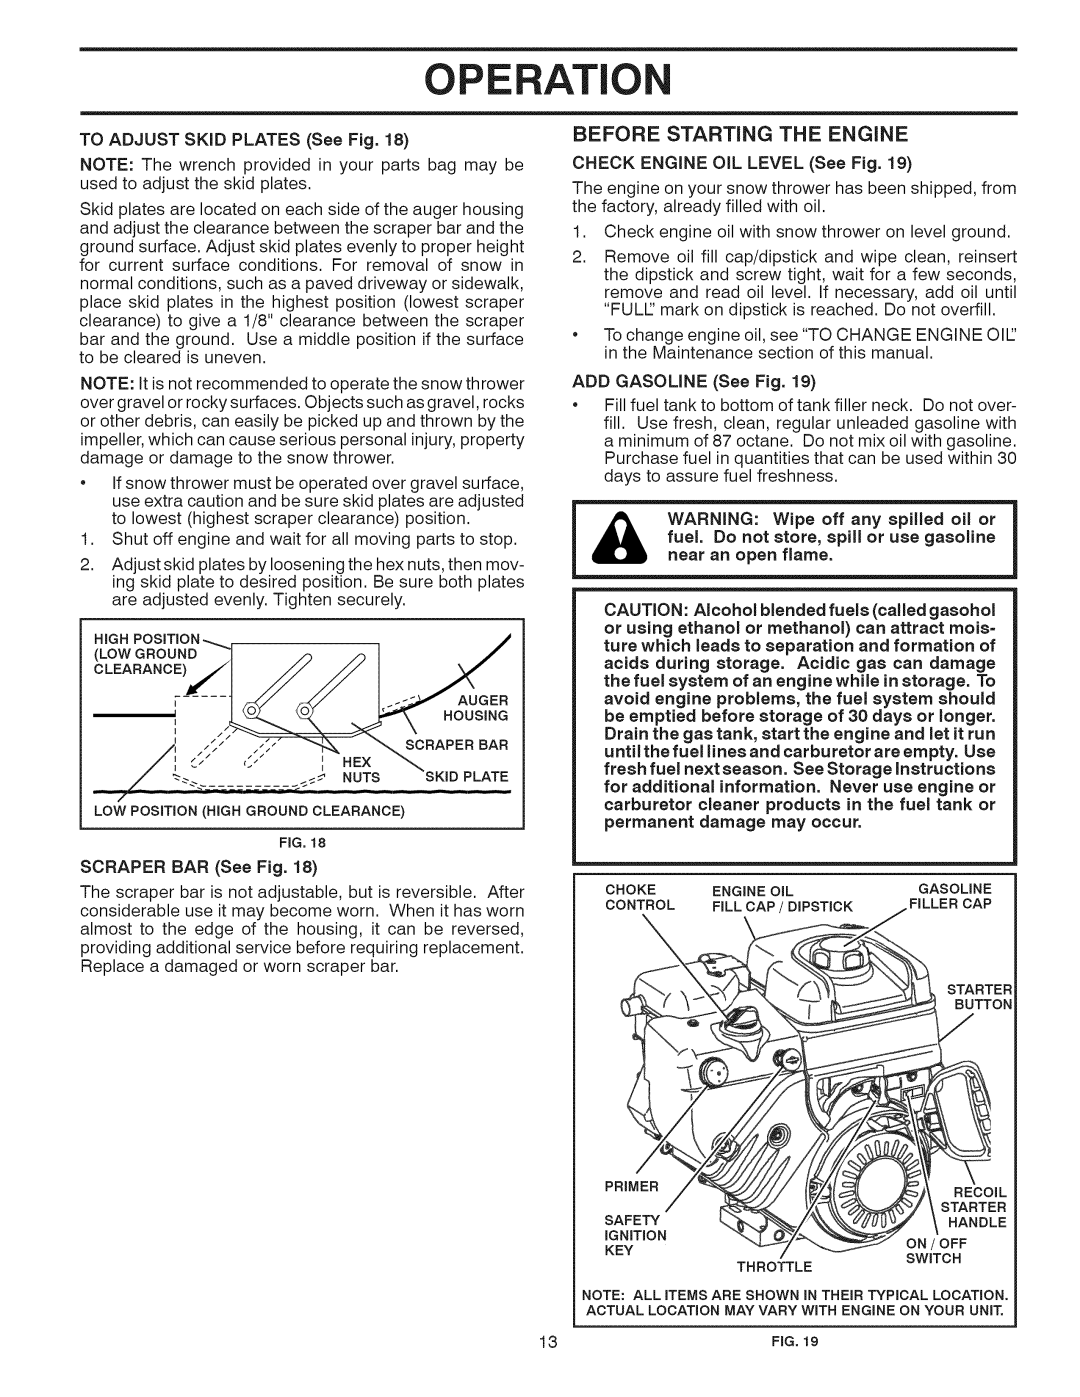 Craftsman 944.528398 owner manual Operation, Before Starting The Engine 